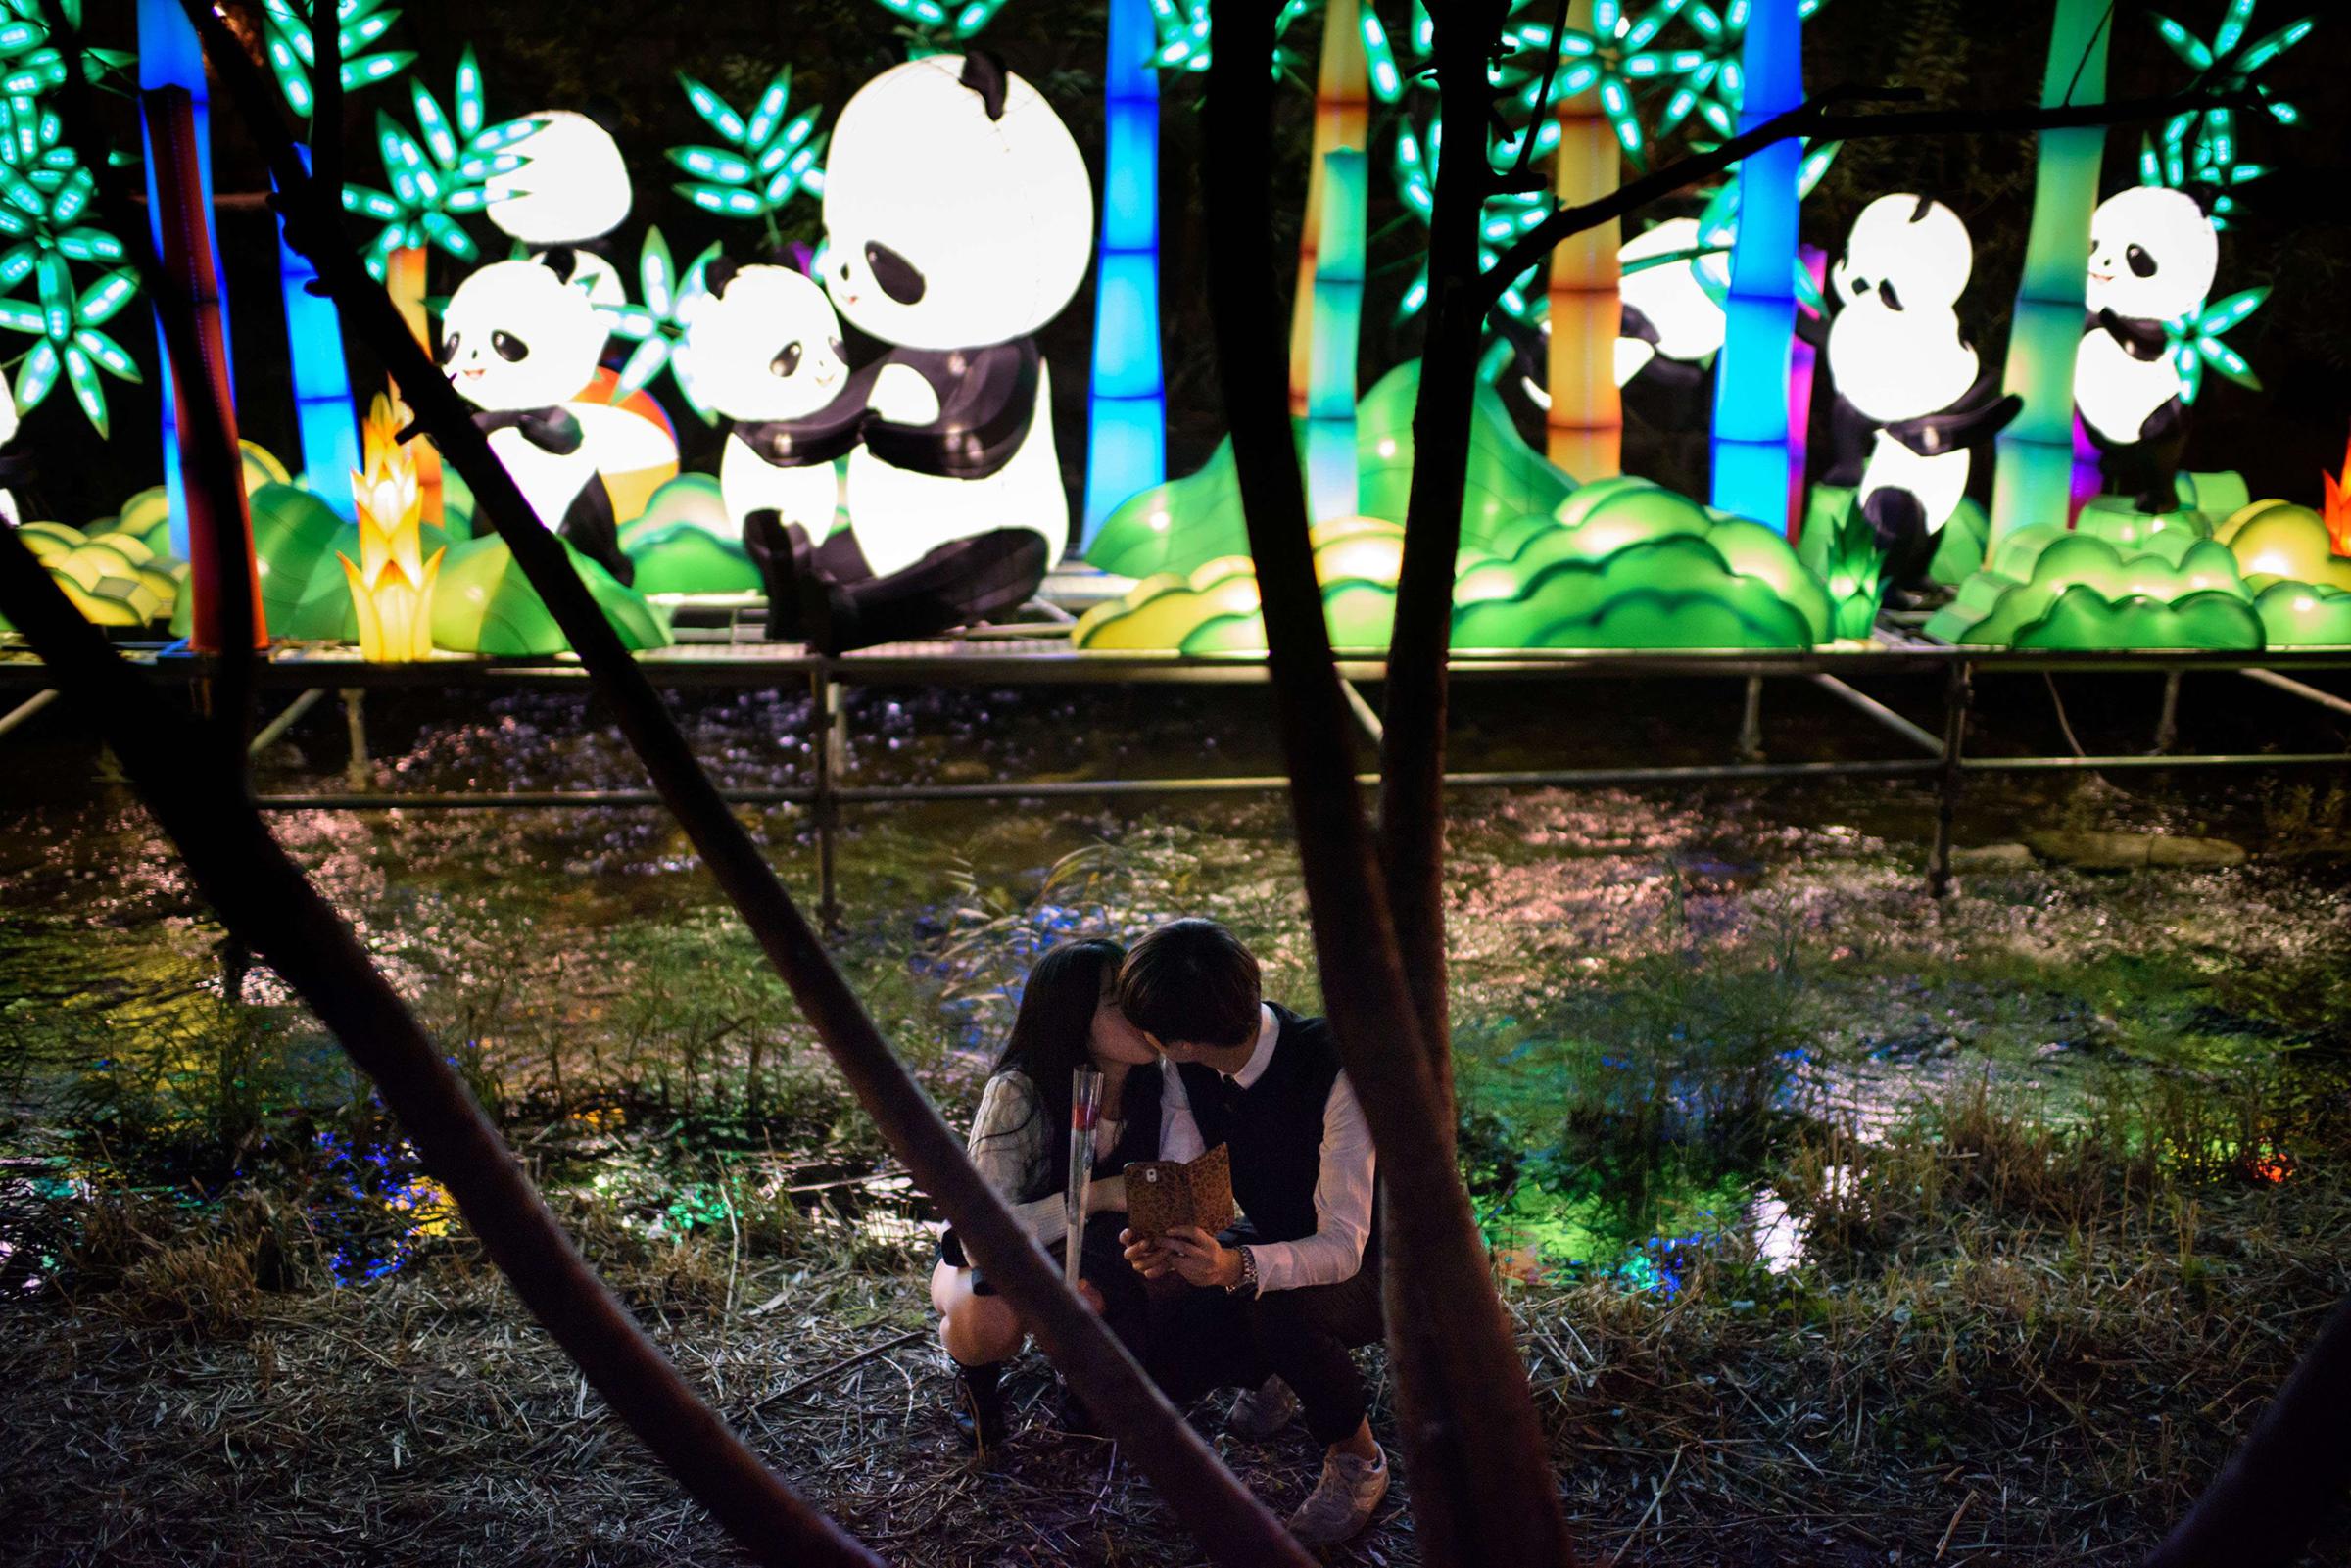 A couple kisses before a display of illuminated panda lanterns on the banks of the Cheonggyechun stream in central Seoul during the 6th annual lantern festival on Nov. 6, 2014.